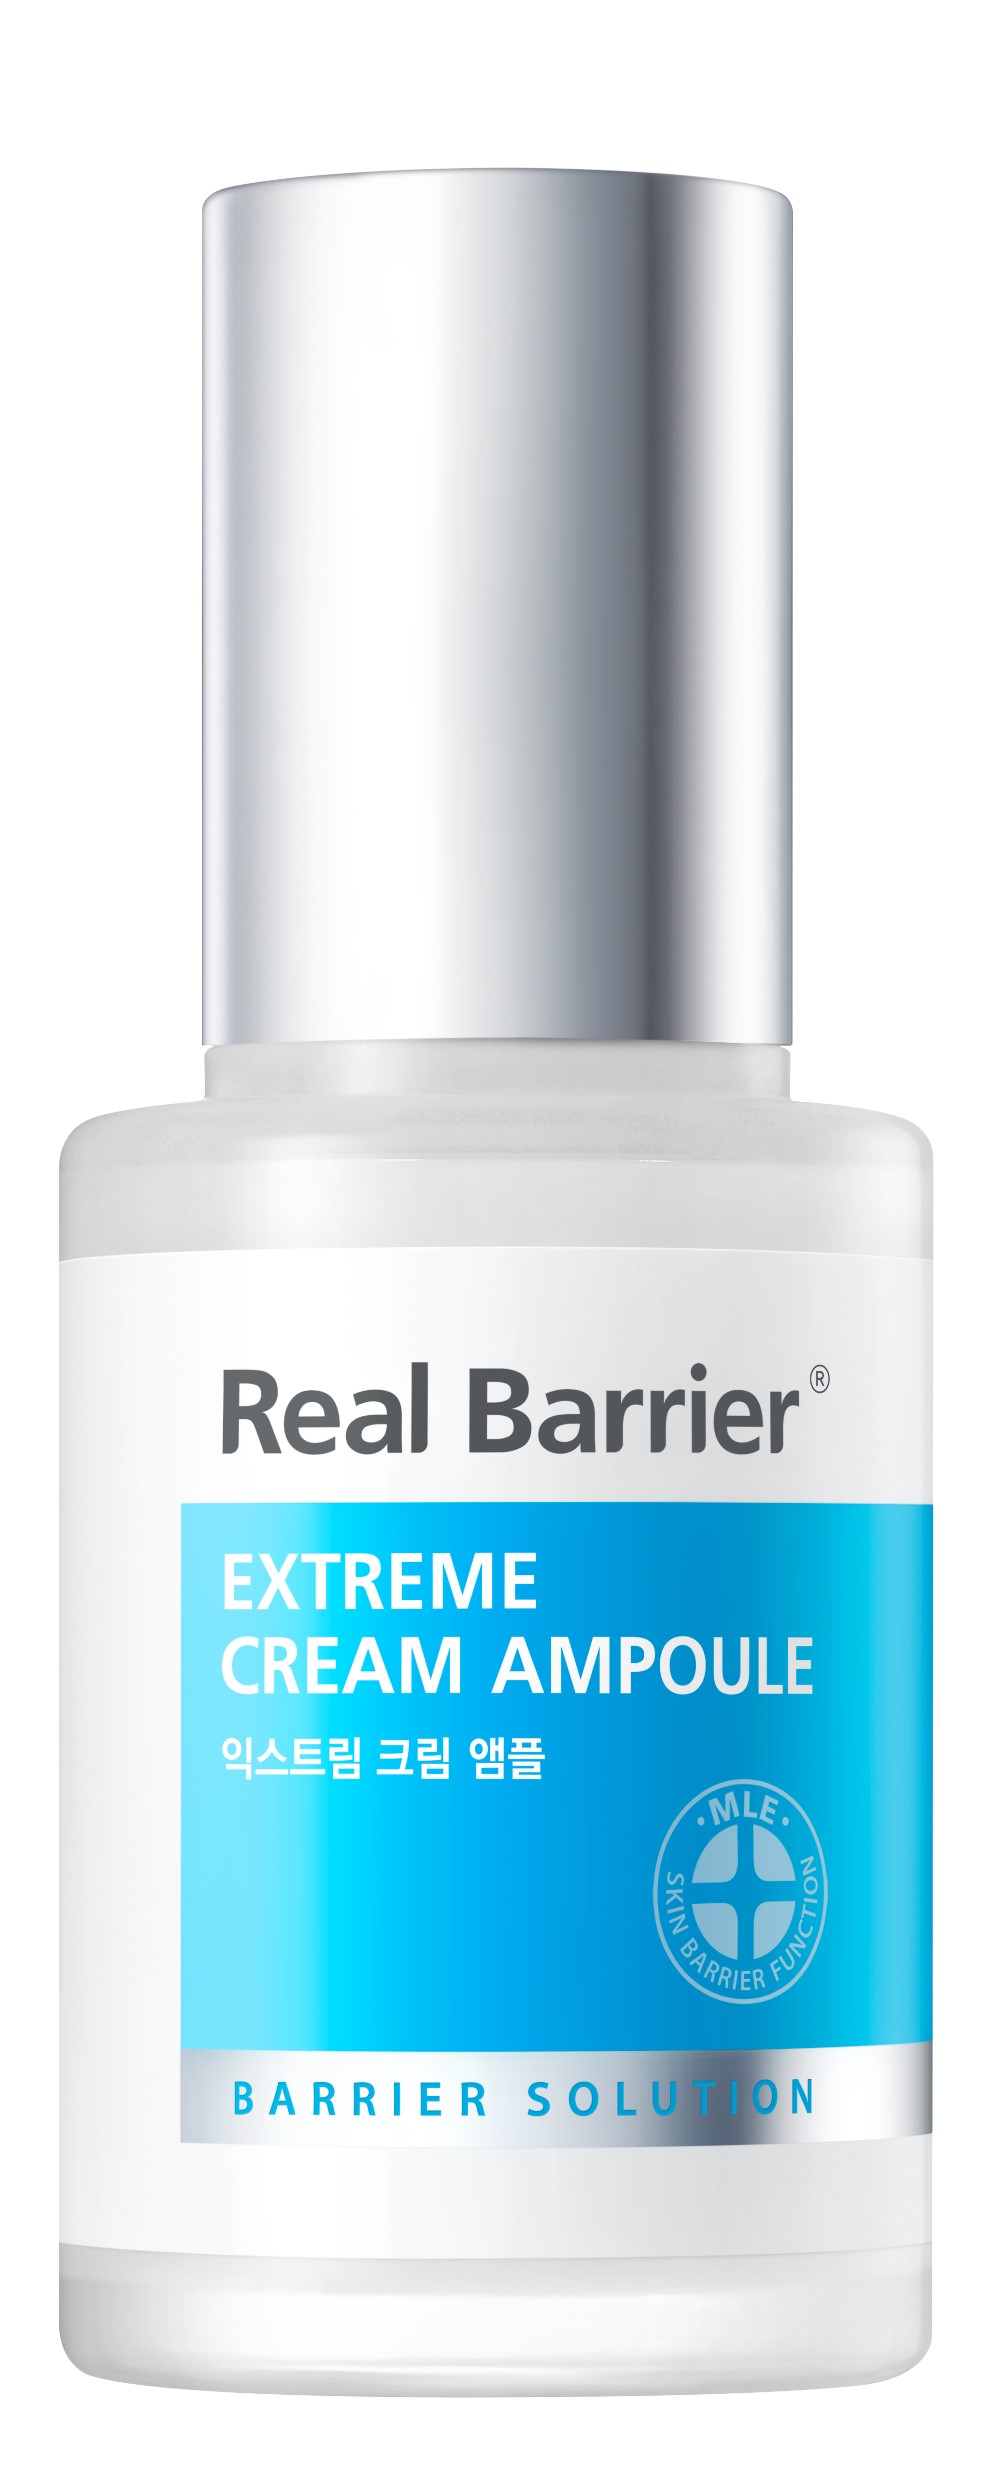 Real Barrier Launches Real Barrier Extreme Cream Ampoule to Smooth and Brighten Flaky Skin thumbnail